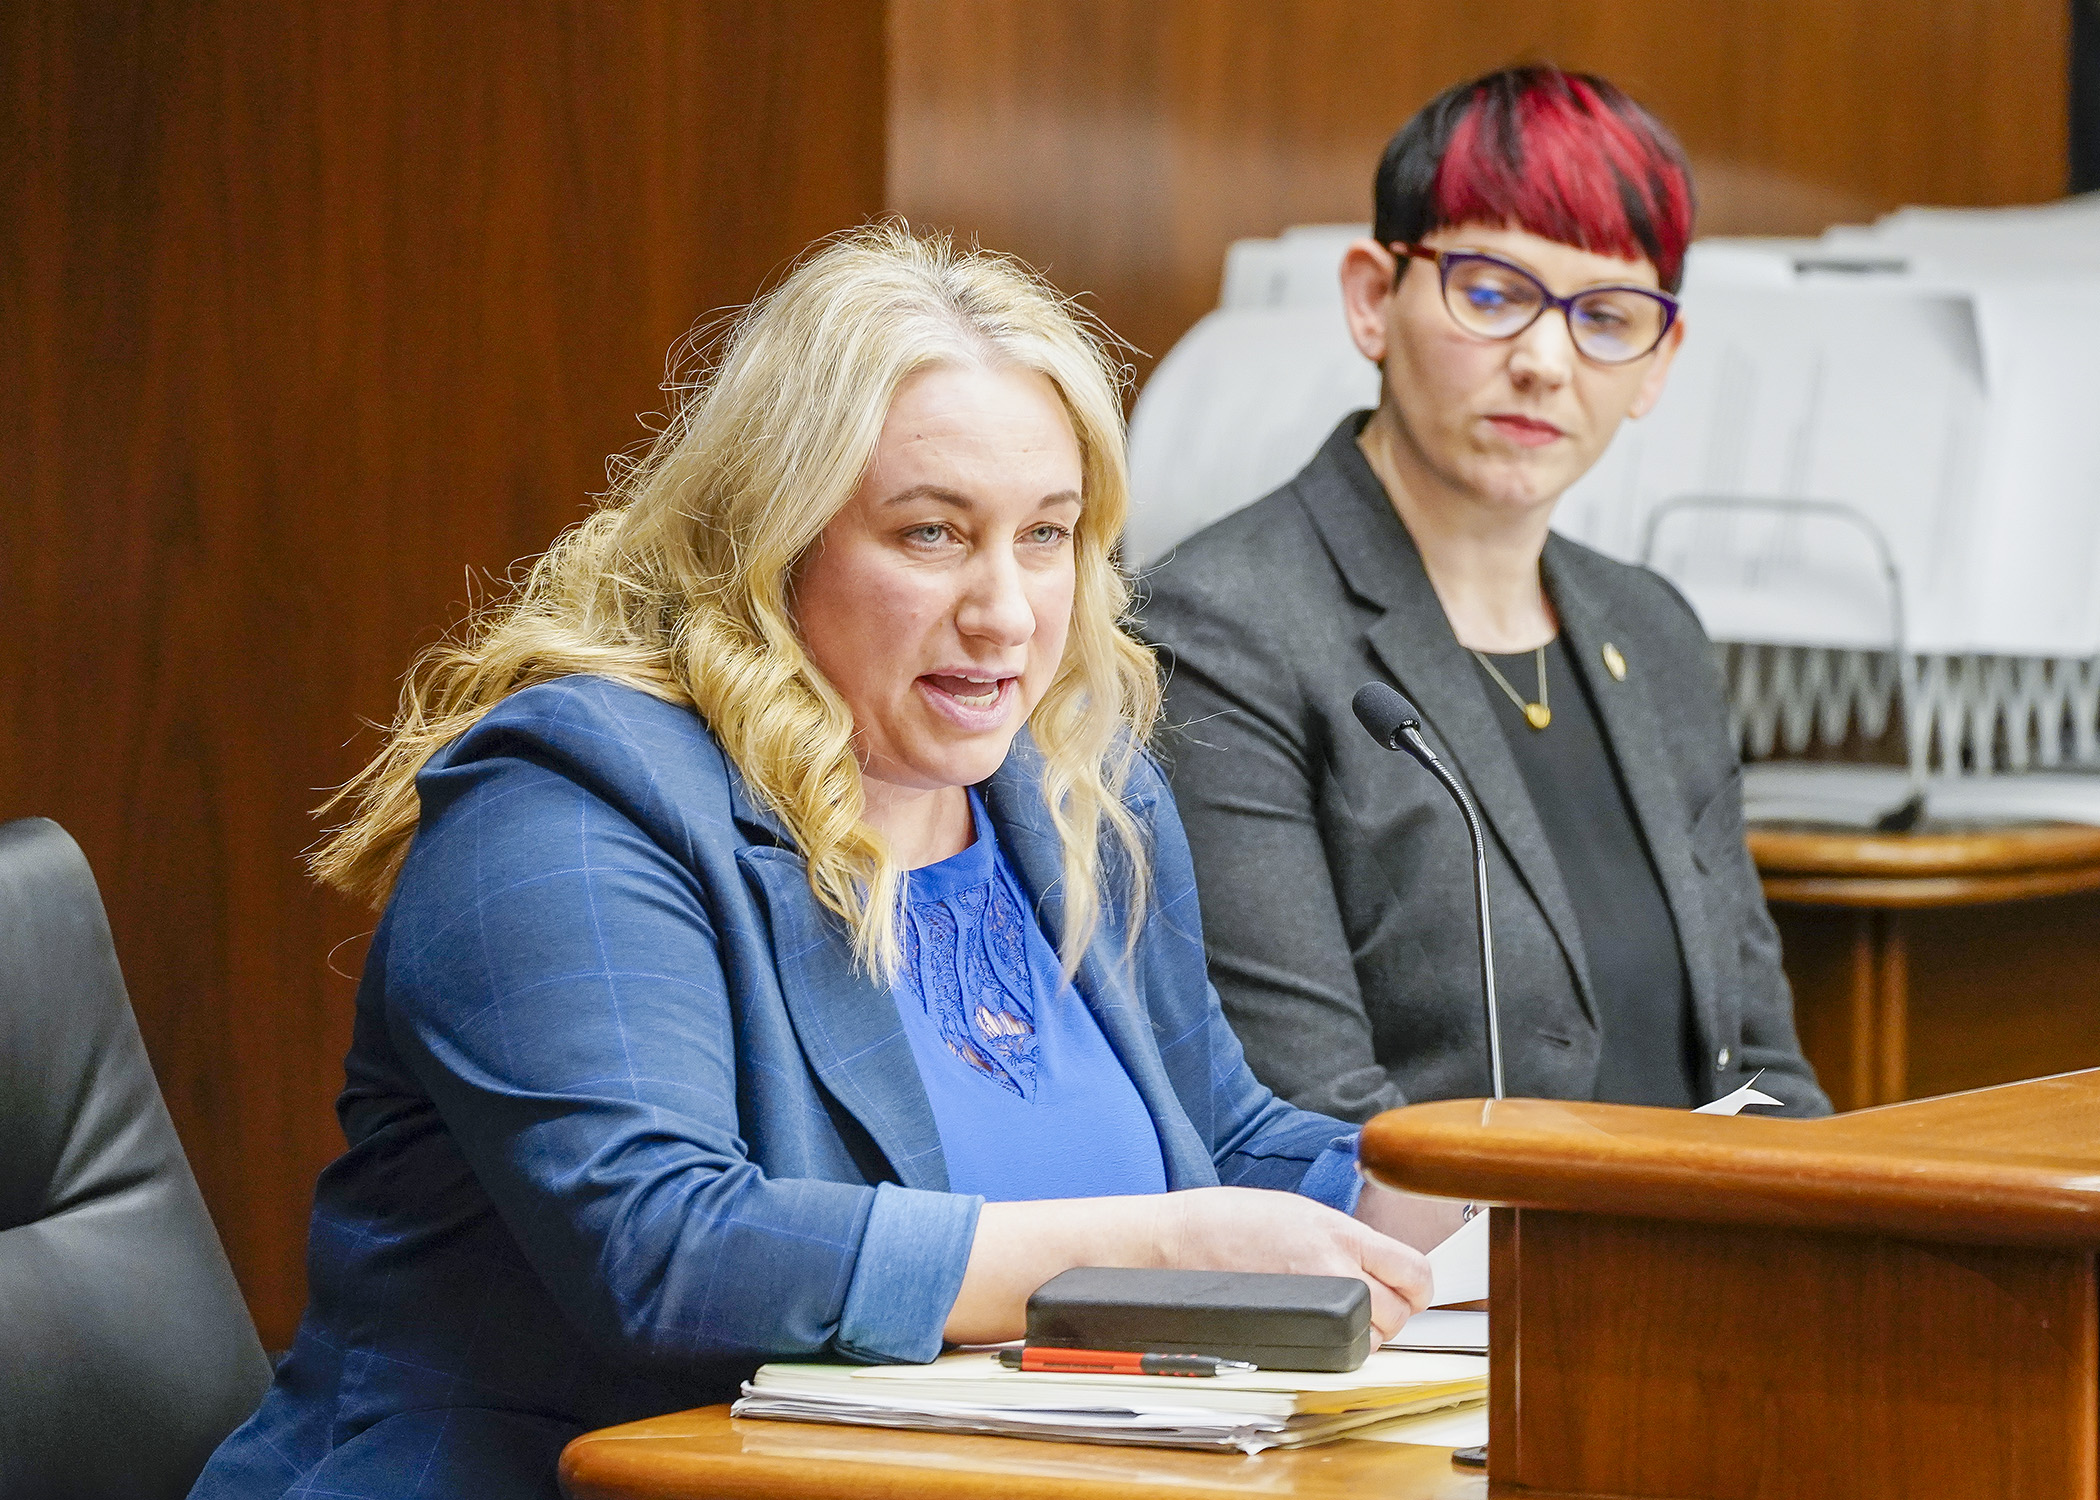 Carrie Mortrud, nurse staffing specialist with the Minnesota Nurses Association, testifies before the House Health Finance and Policy Committee March 14 in support of HF1700, sponsored by Rep. Sandra Feist, right. (Photo by Andrew VonBank)